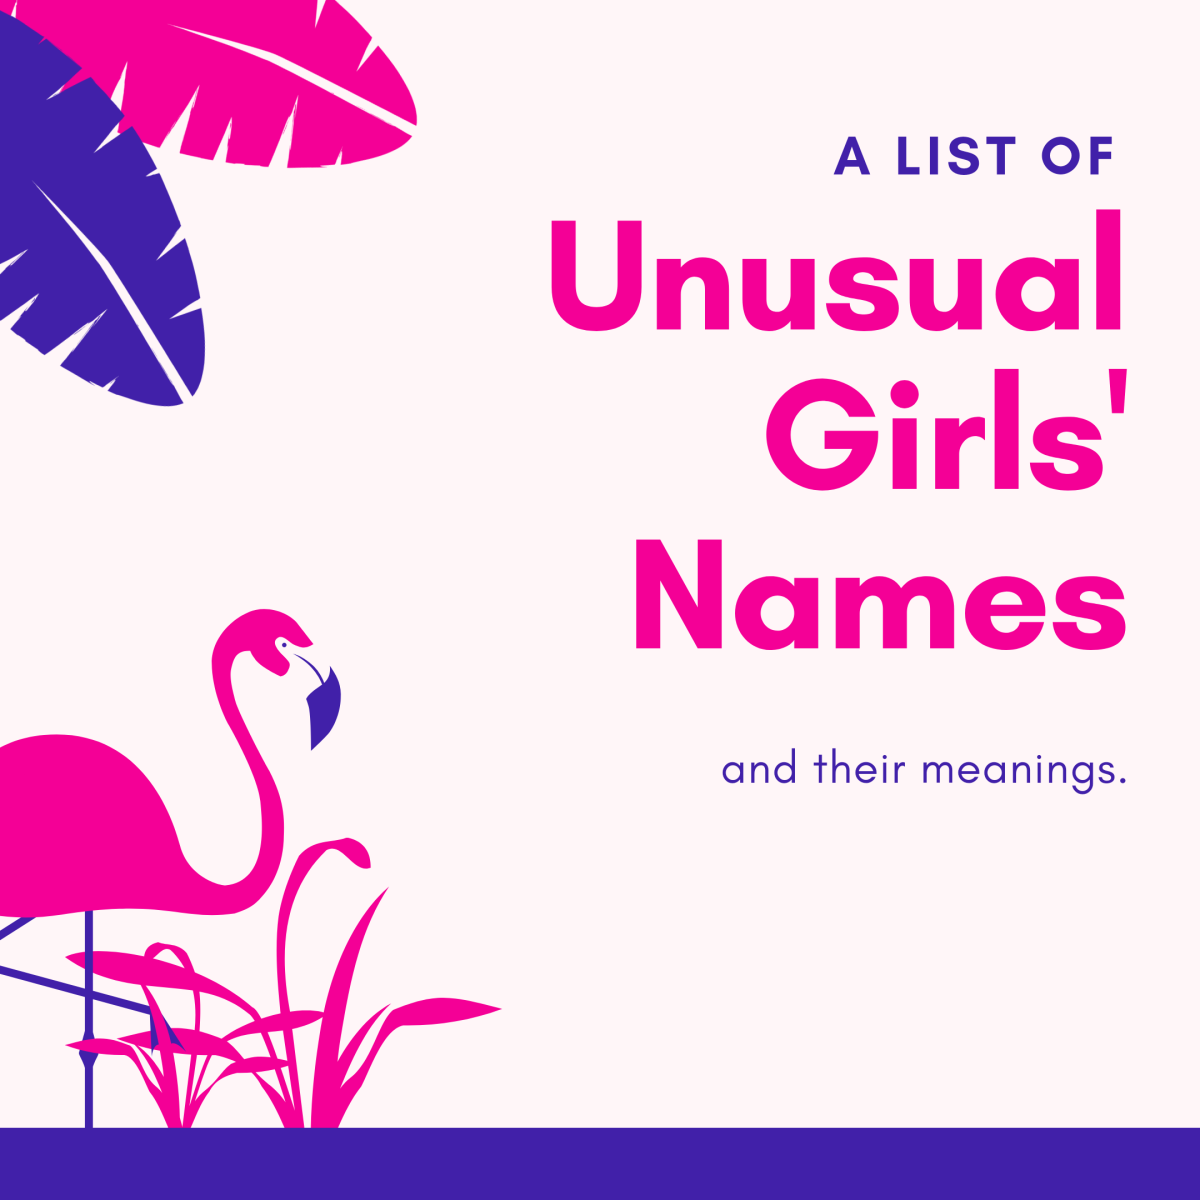 A List of Unusual Girls Names and Meanings